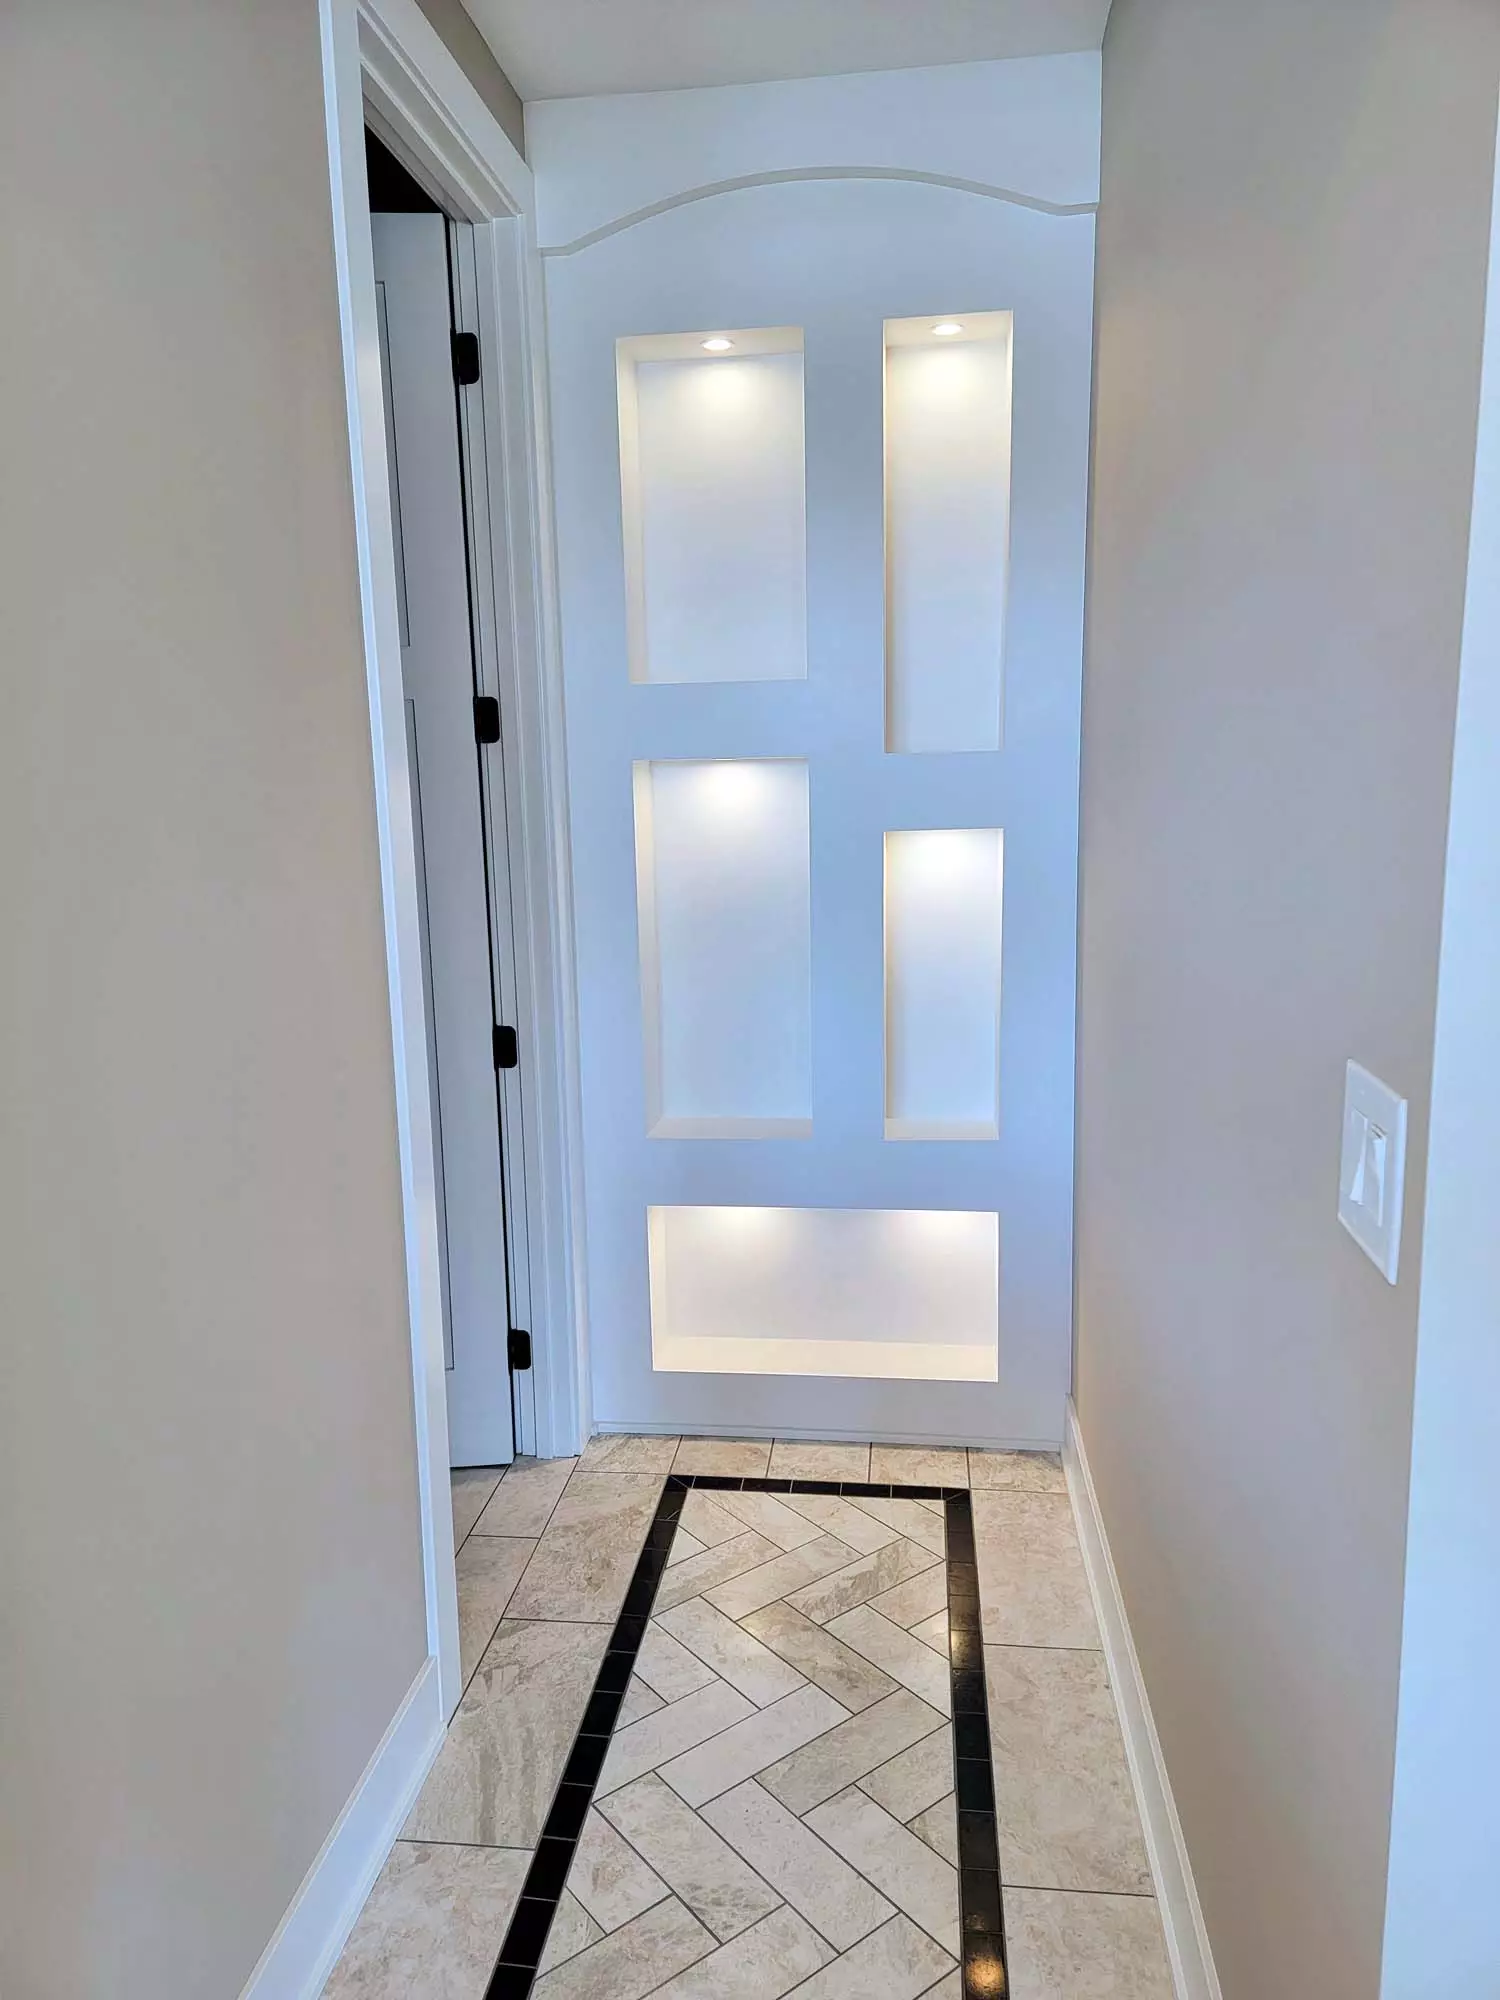 Sheetrock niches with LED lighting